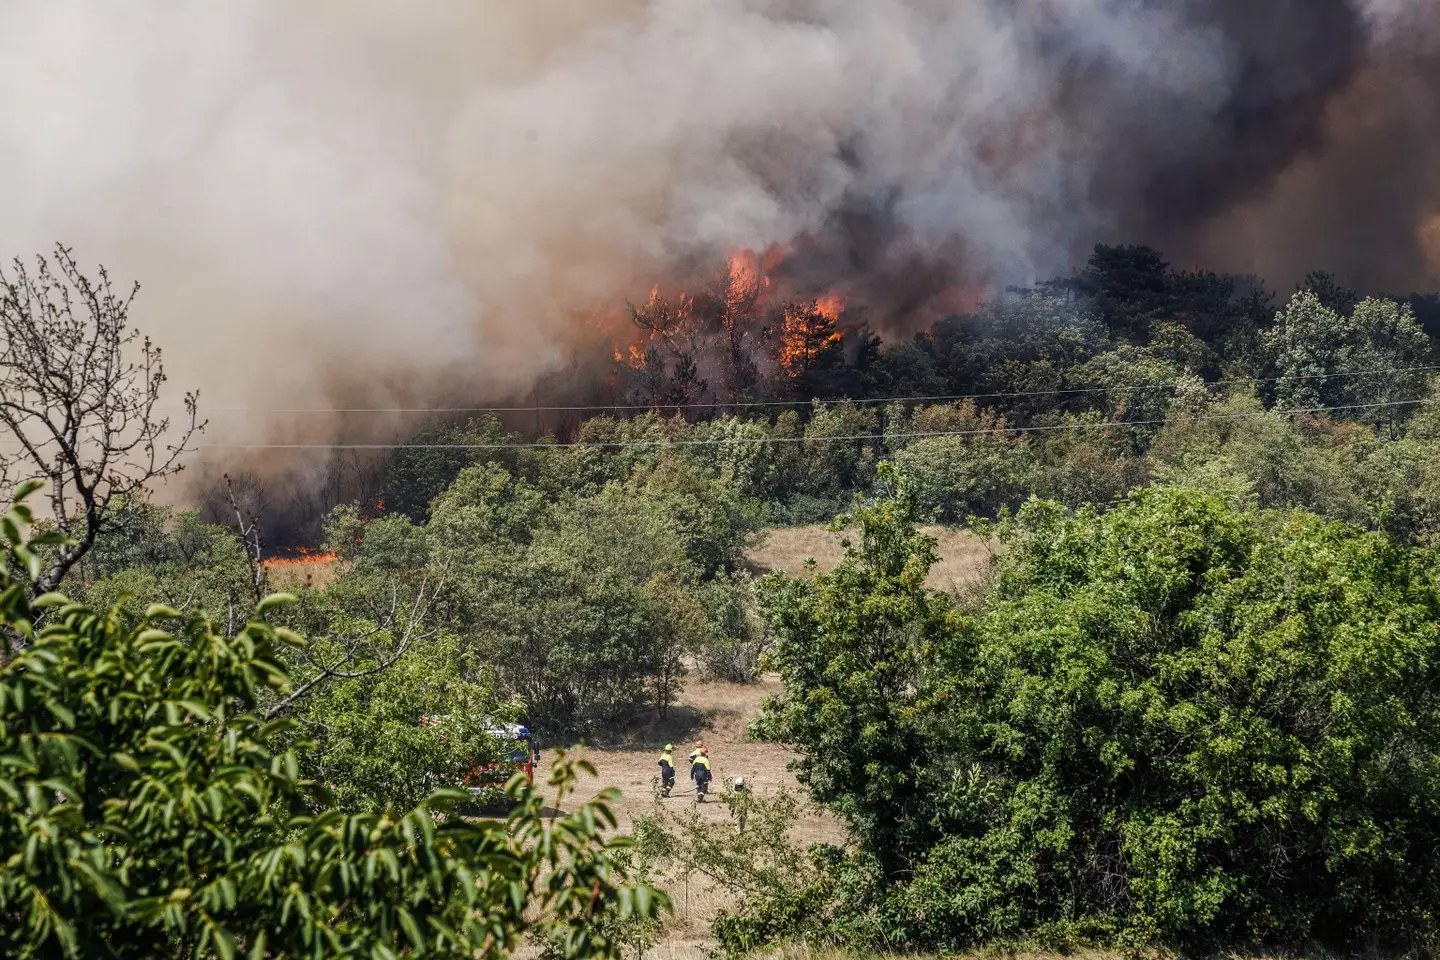 Fires have raged in the Kras region of Slovenia.